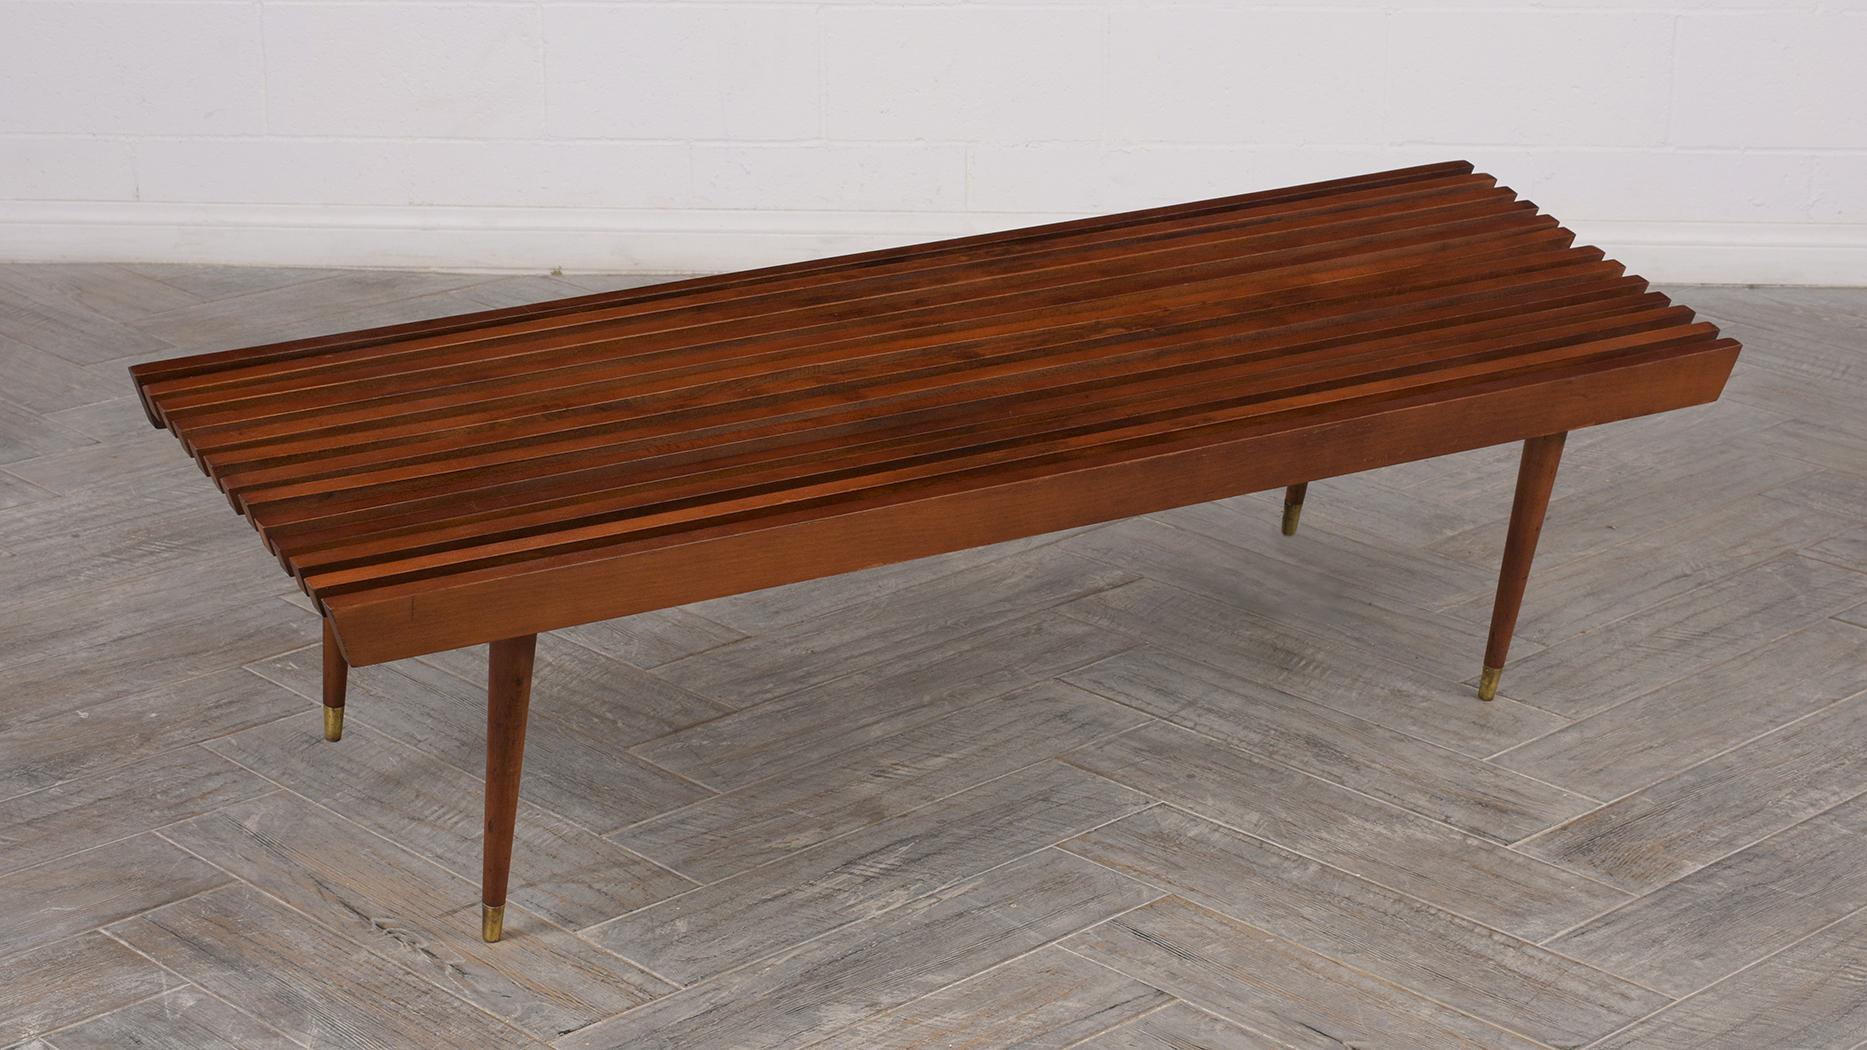 Mid-Century Modern slat bench is stained a rich walnut color and has a elegant patinated finish, circa 1960s. Sophisticated but simple architectural structure which can easily fit in an inside or outside space.